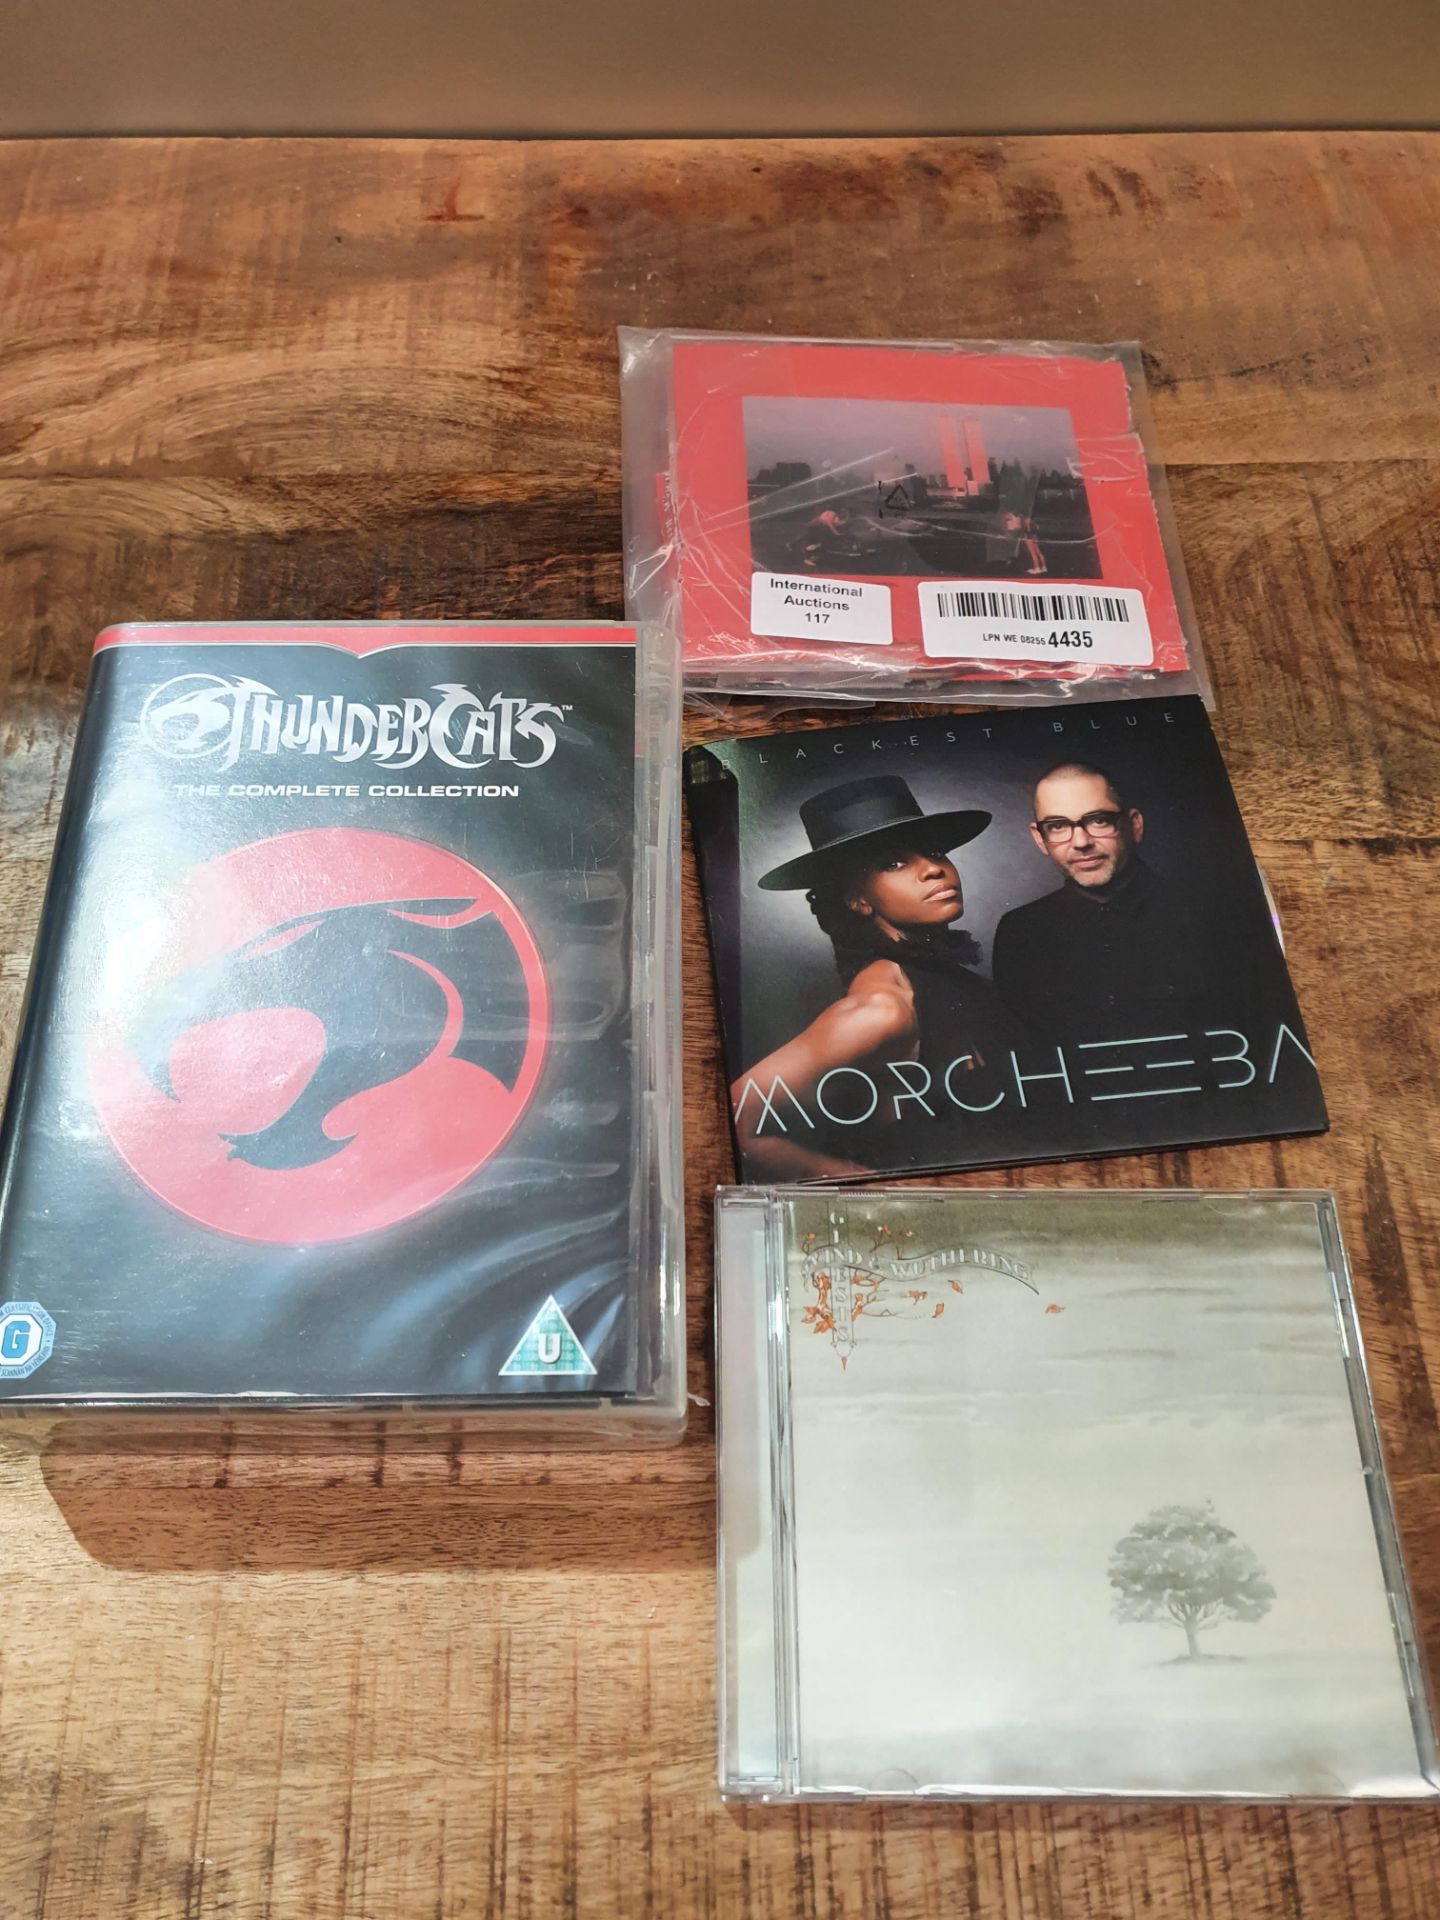 X 4 ITEMS TO INCLUDE MORCHEEBA, THUNDERCATS AND 2 OTHER CDS